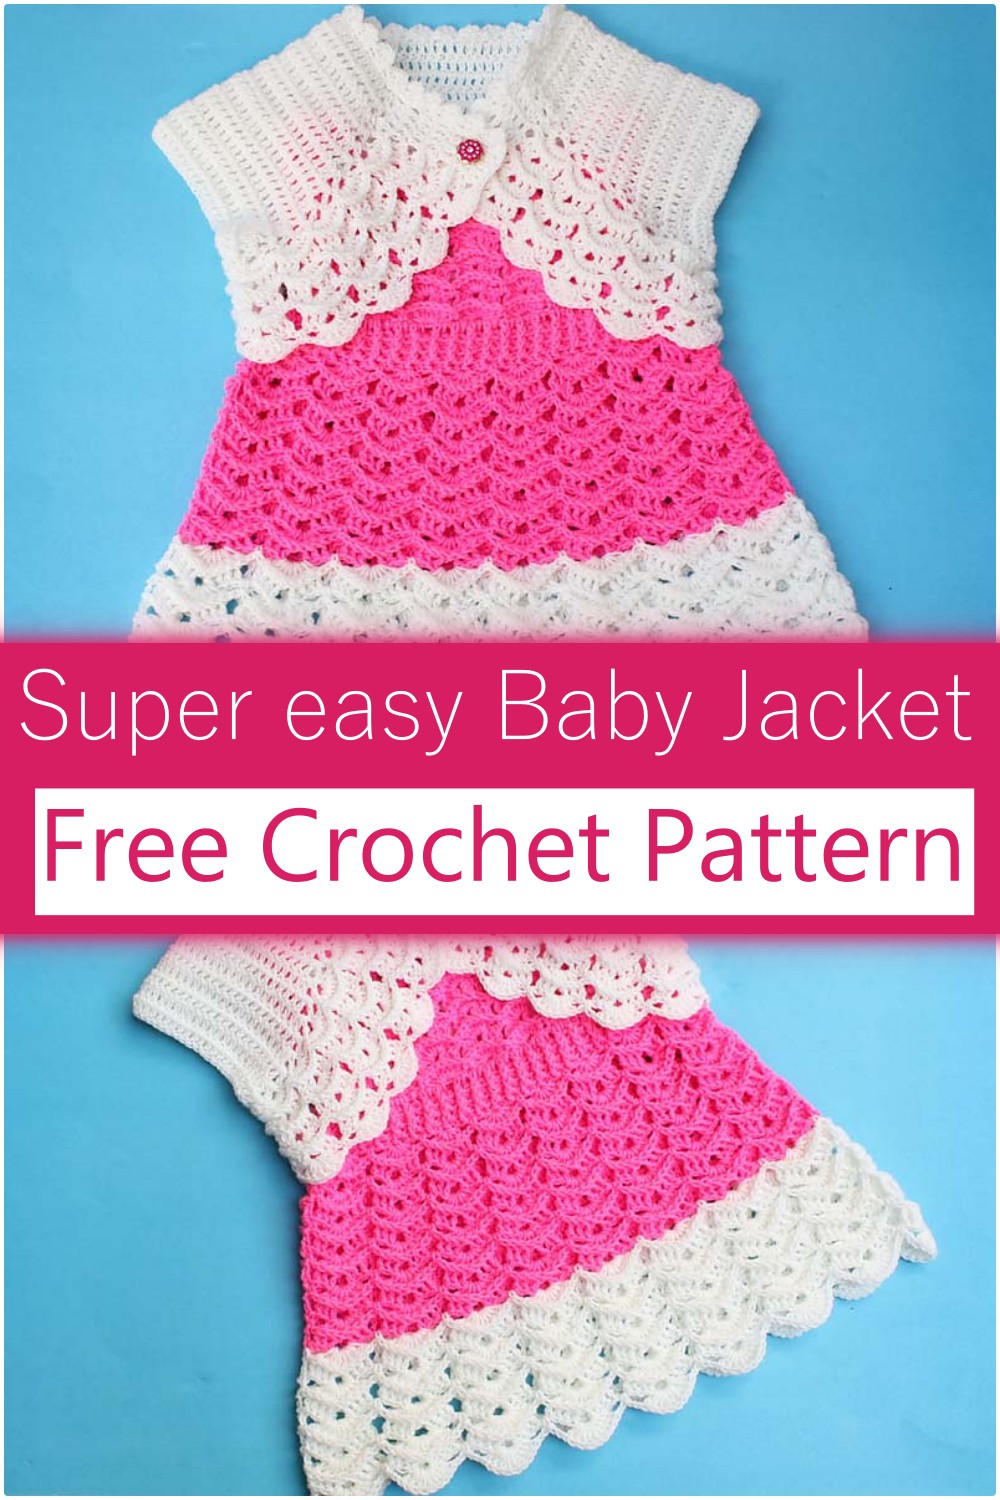 Crochet Baby Jacket With Buttons